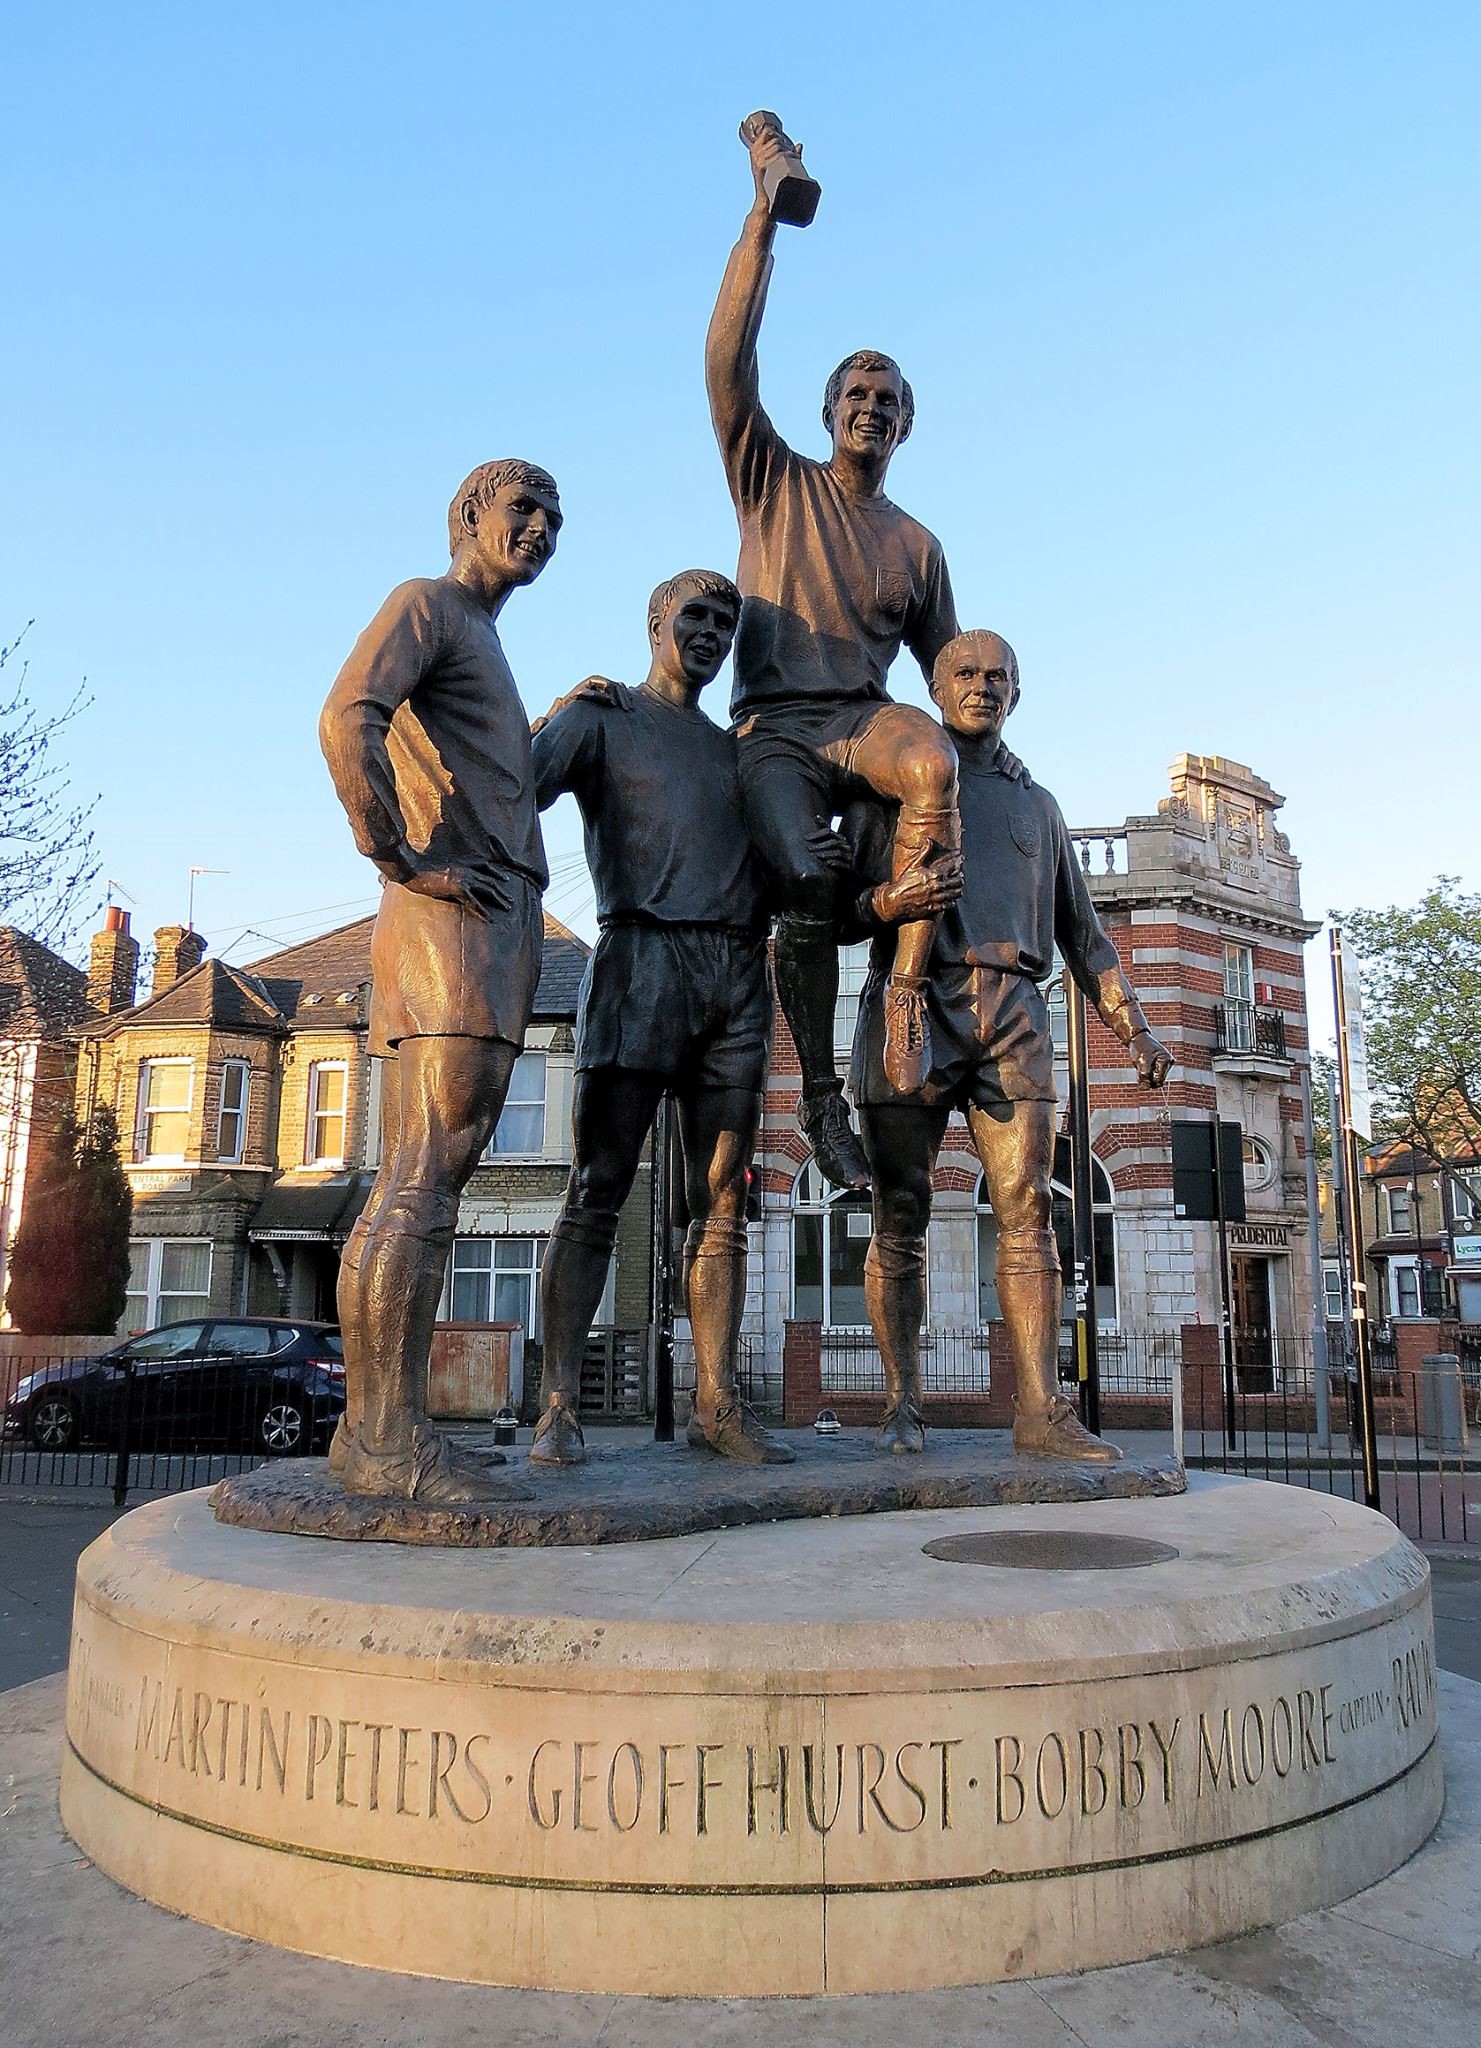 Statue of Booby Moore. West Ham